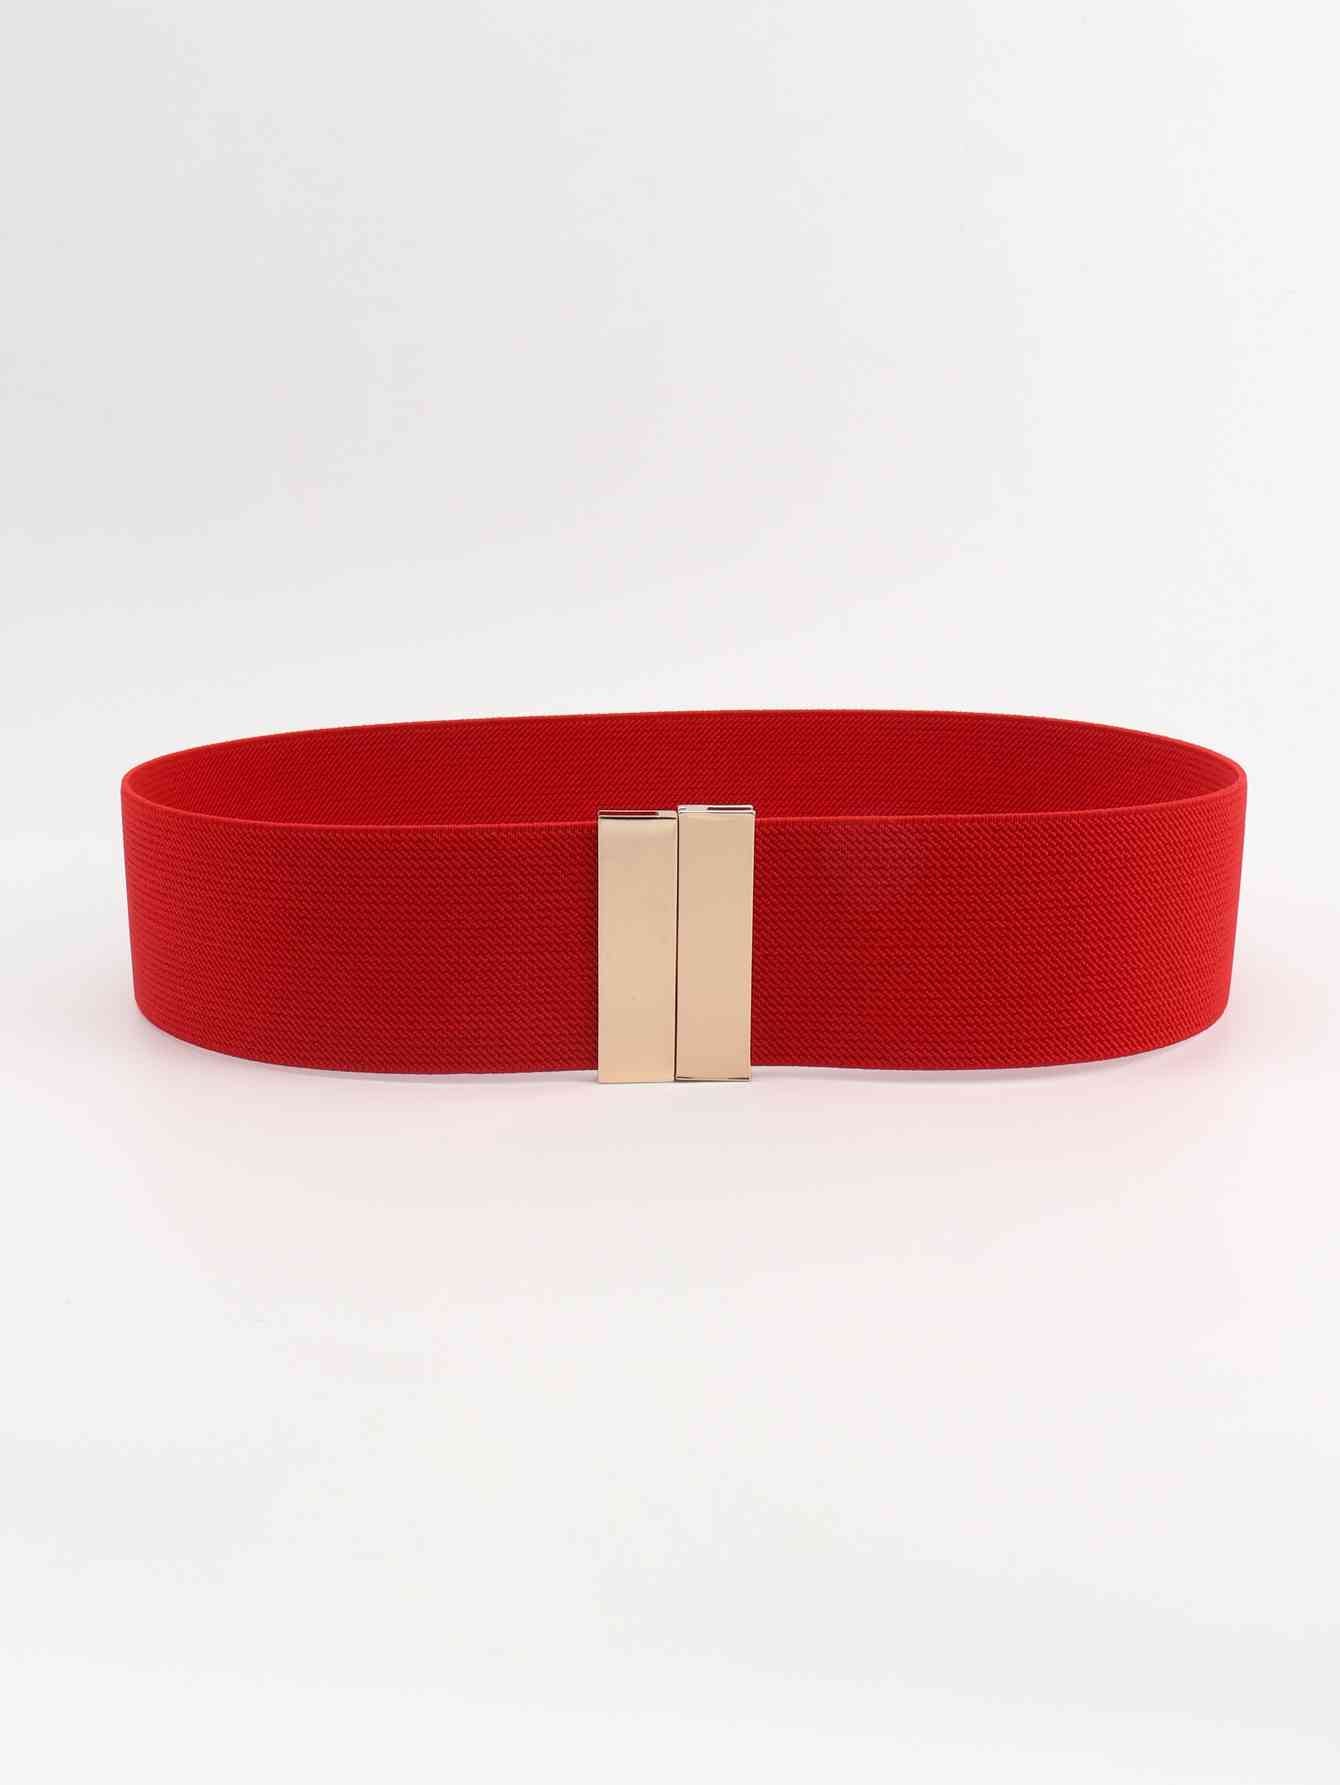 Alloy Buckle Elastic Belt Deep Red One Size